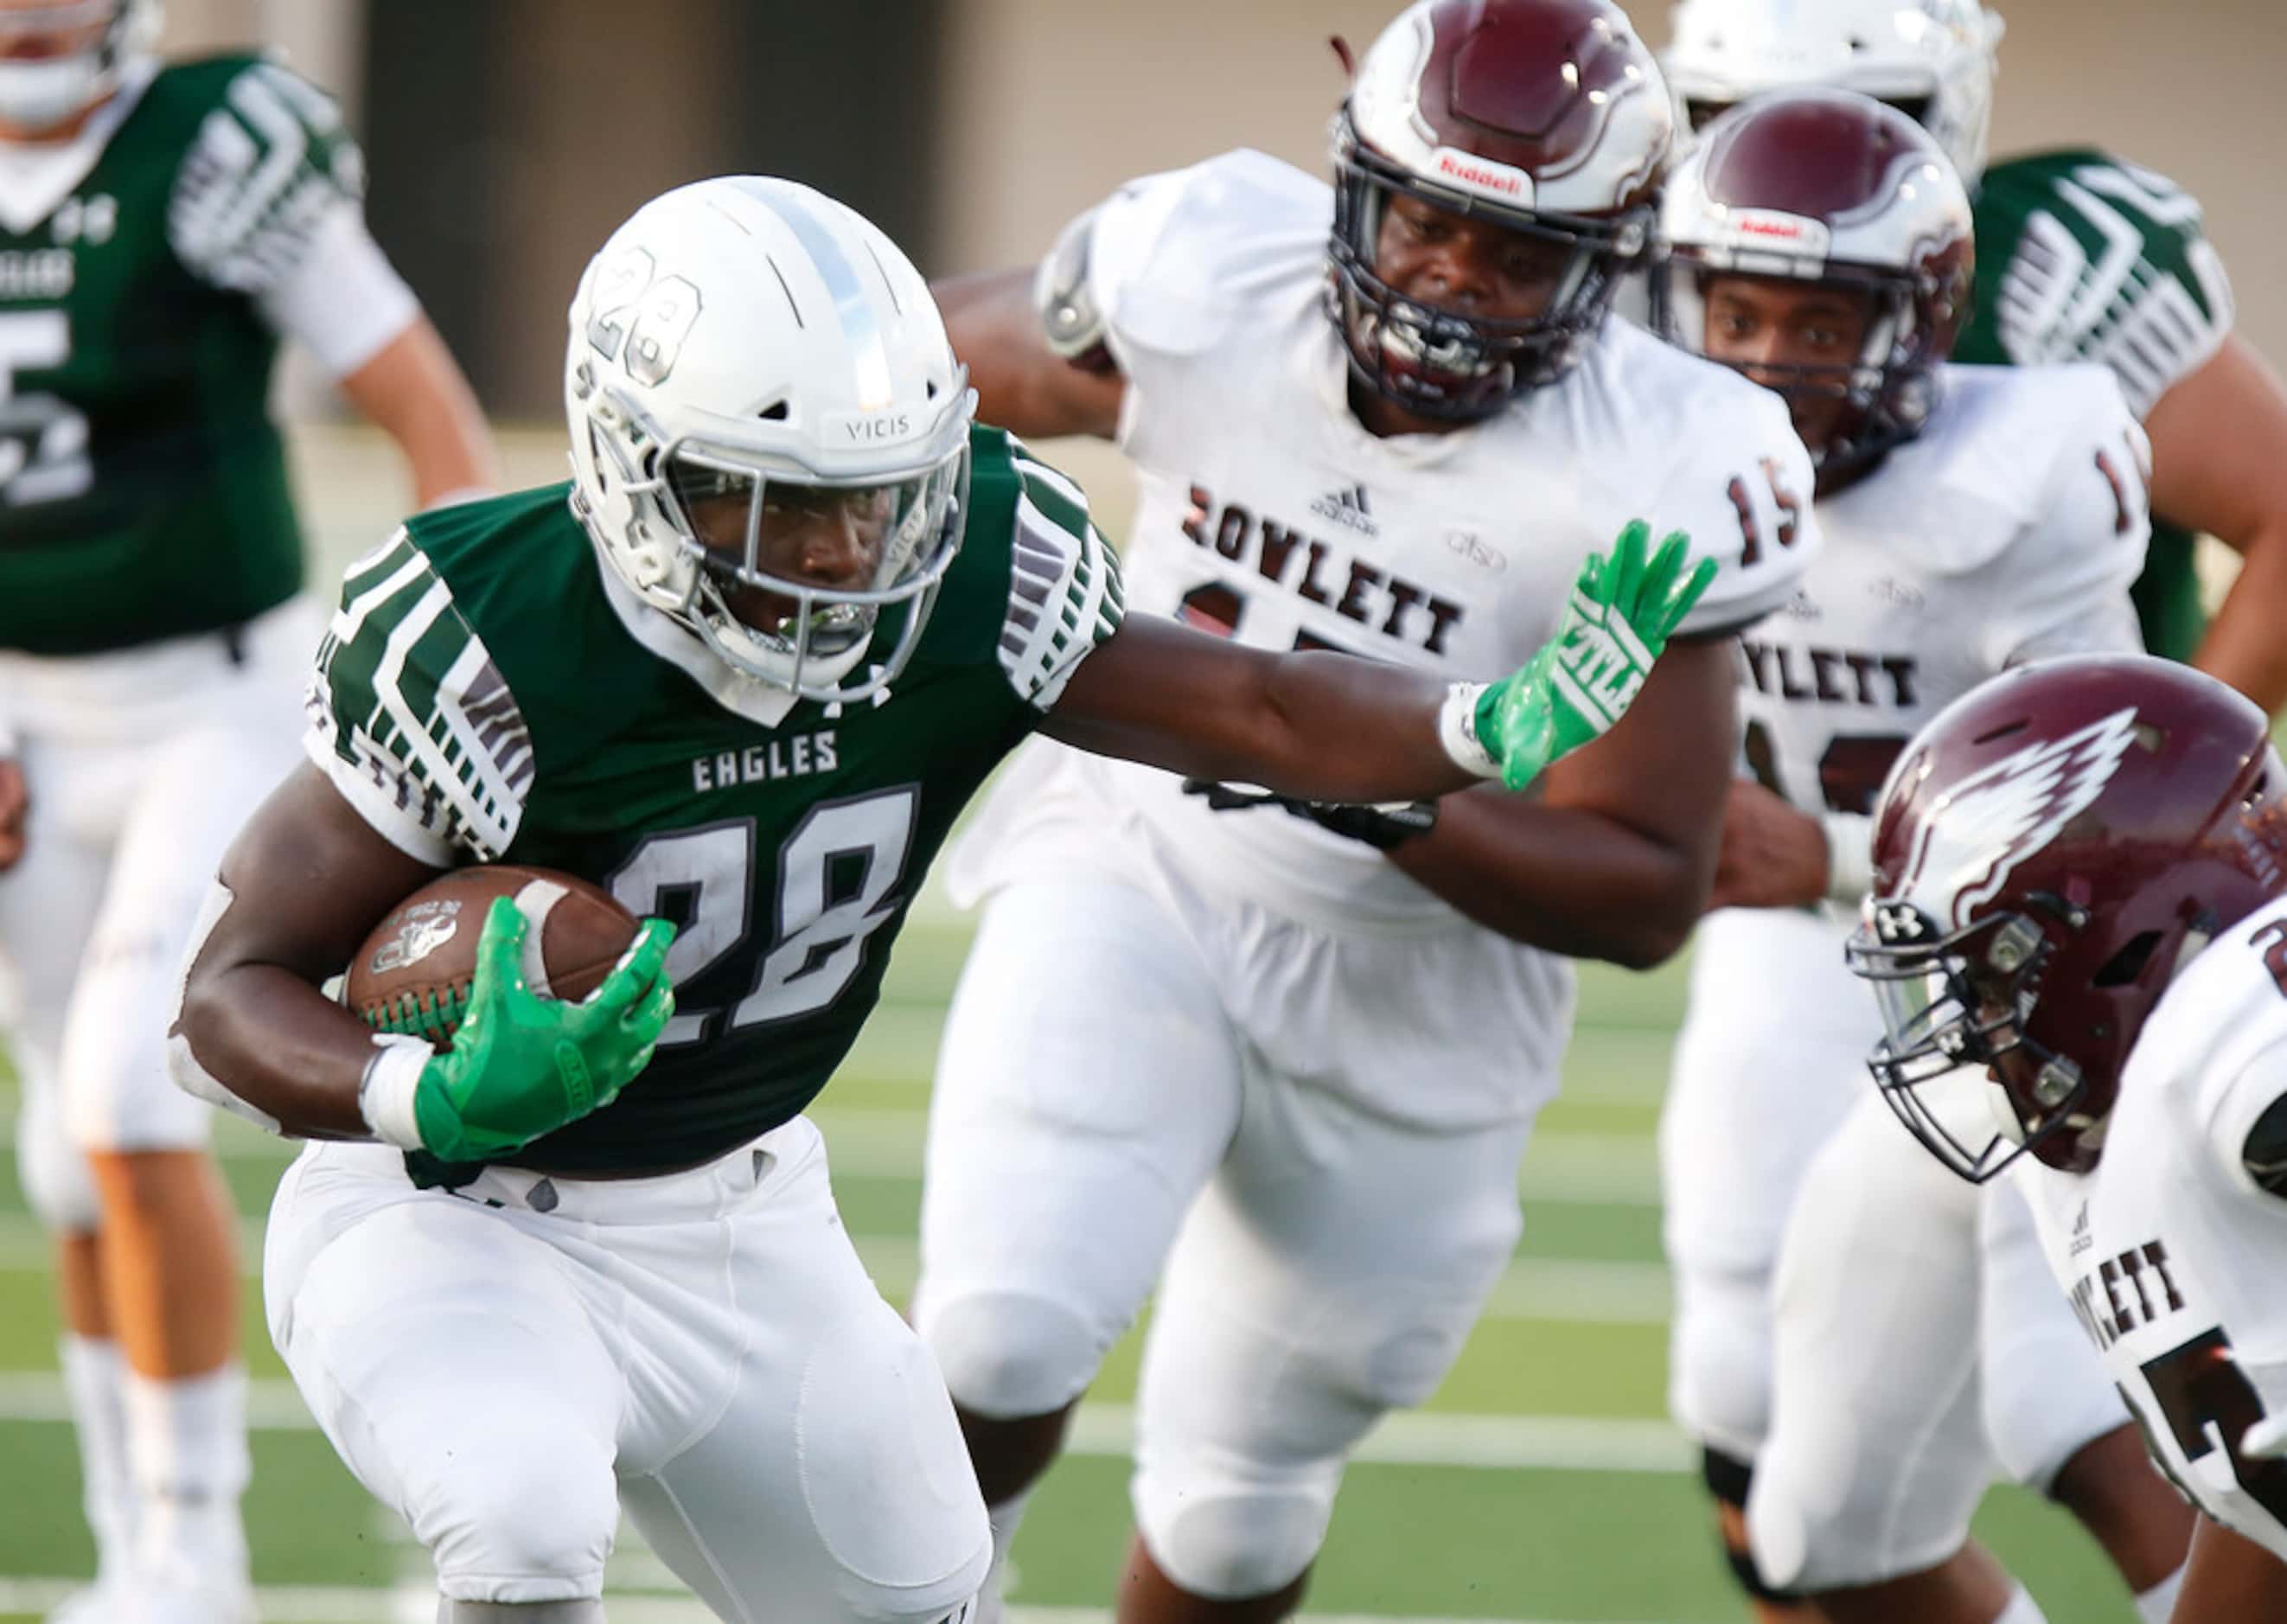 Prosper High School running back JT Lane (28) carries the ball into the end zone during the...